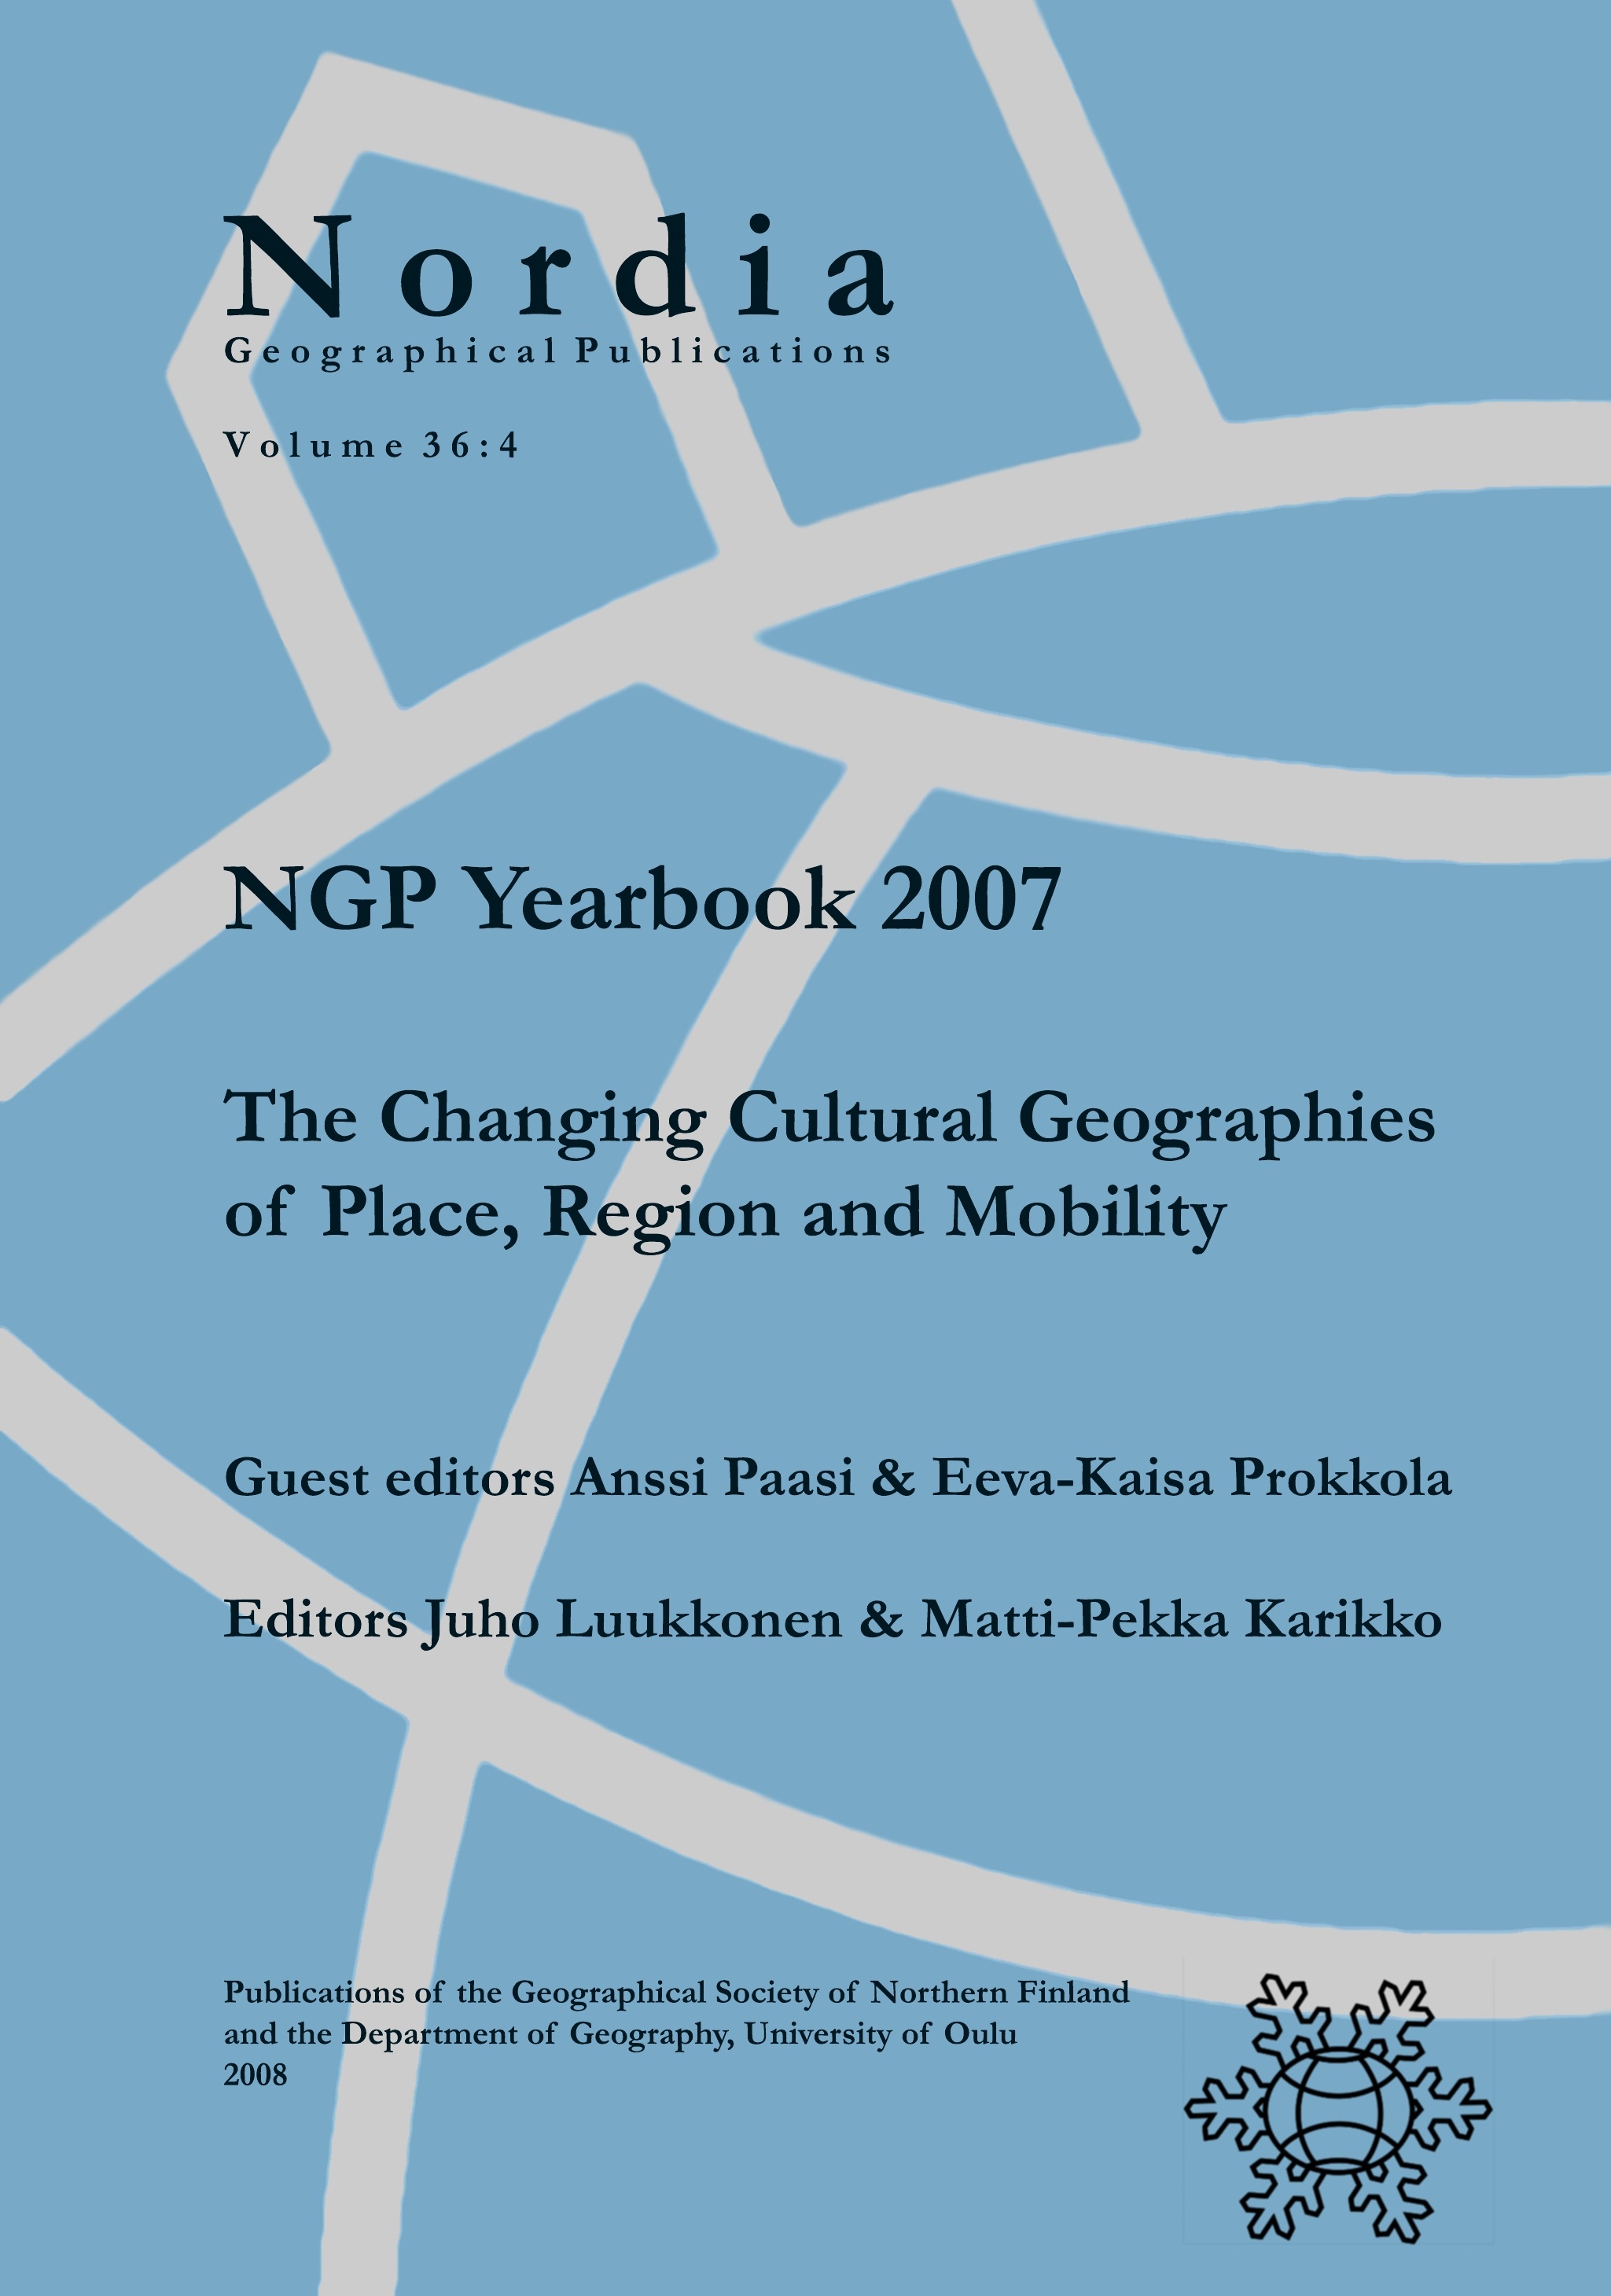 					View Vol. 36 No. 4: NGP Yearbook 2007: The Changing Cultural Geographies of Place, Region and Mobility
				